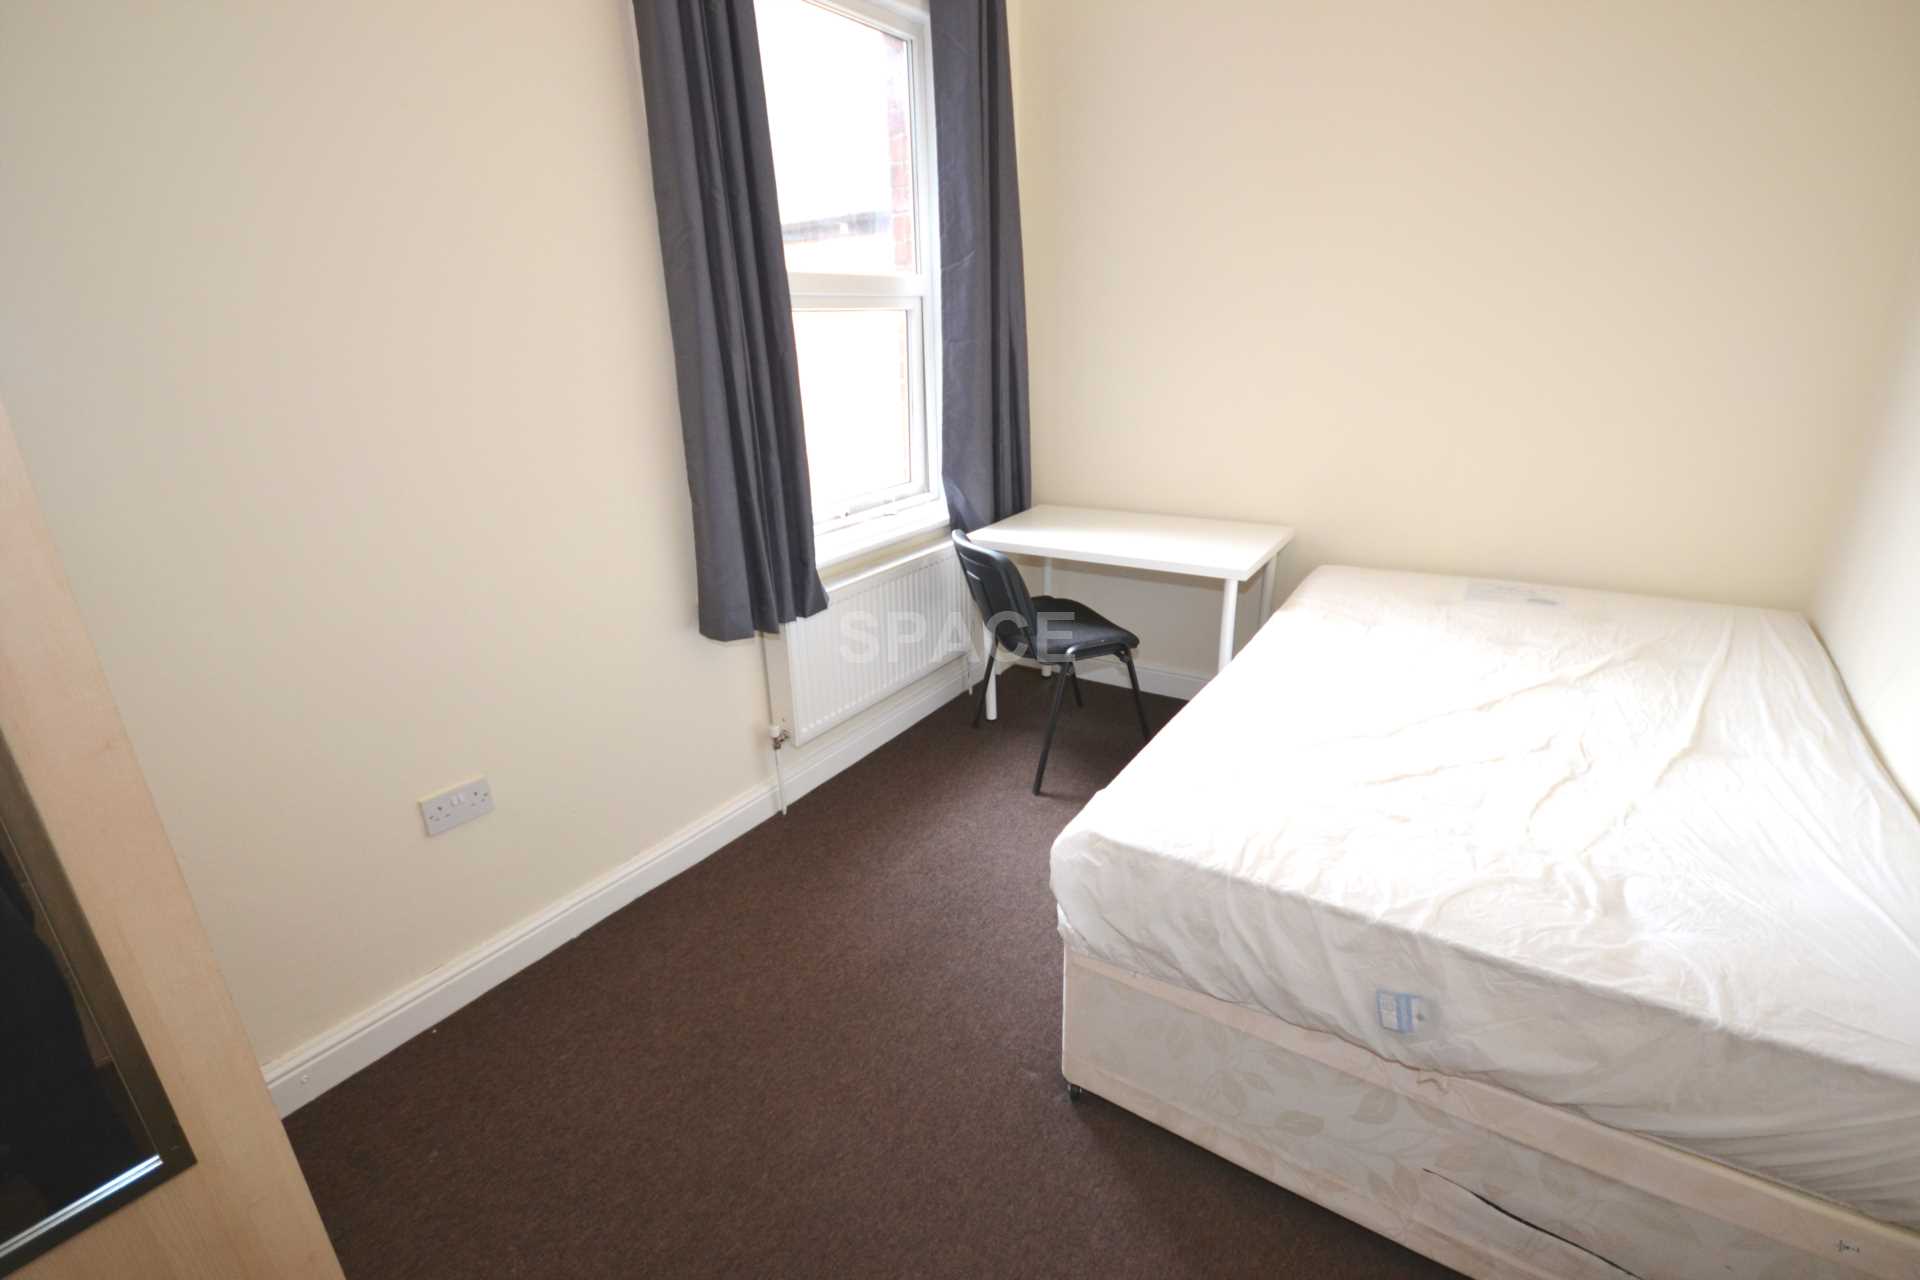 1 bed Room for rent in Reading. From Space